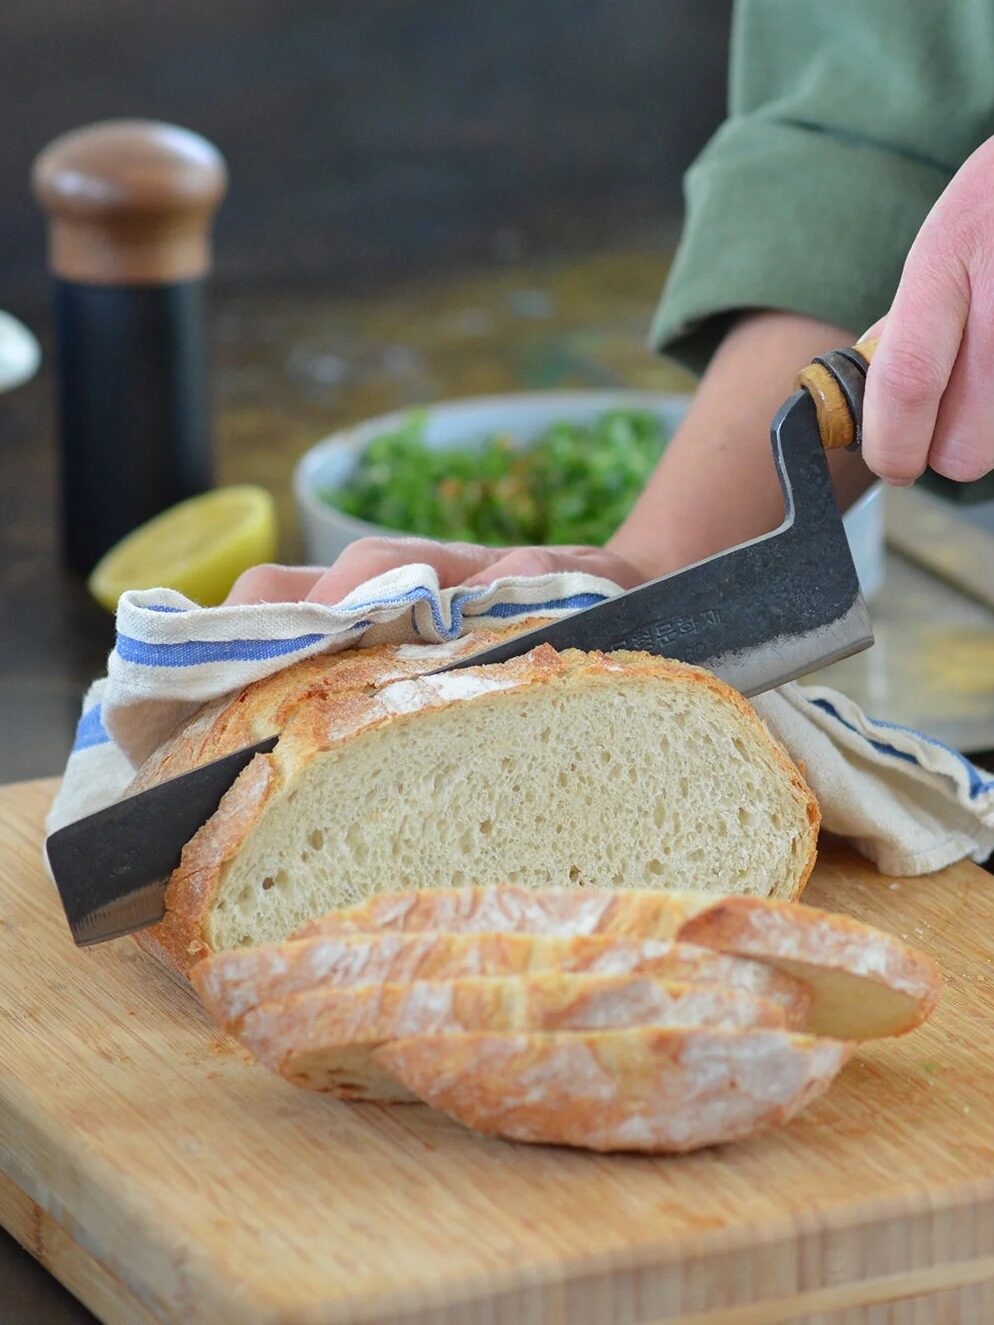 A person cutting a loaf of bread on a wooden cutting board, with a bowl of greens and another person in the background.